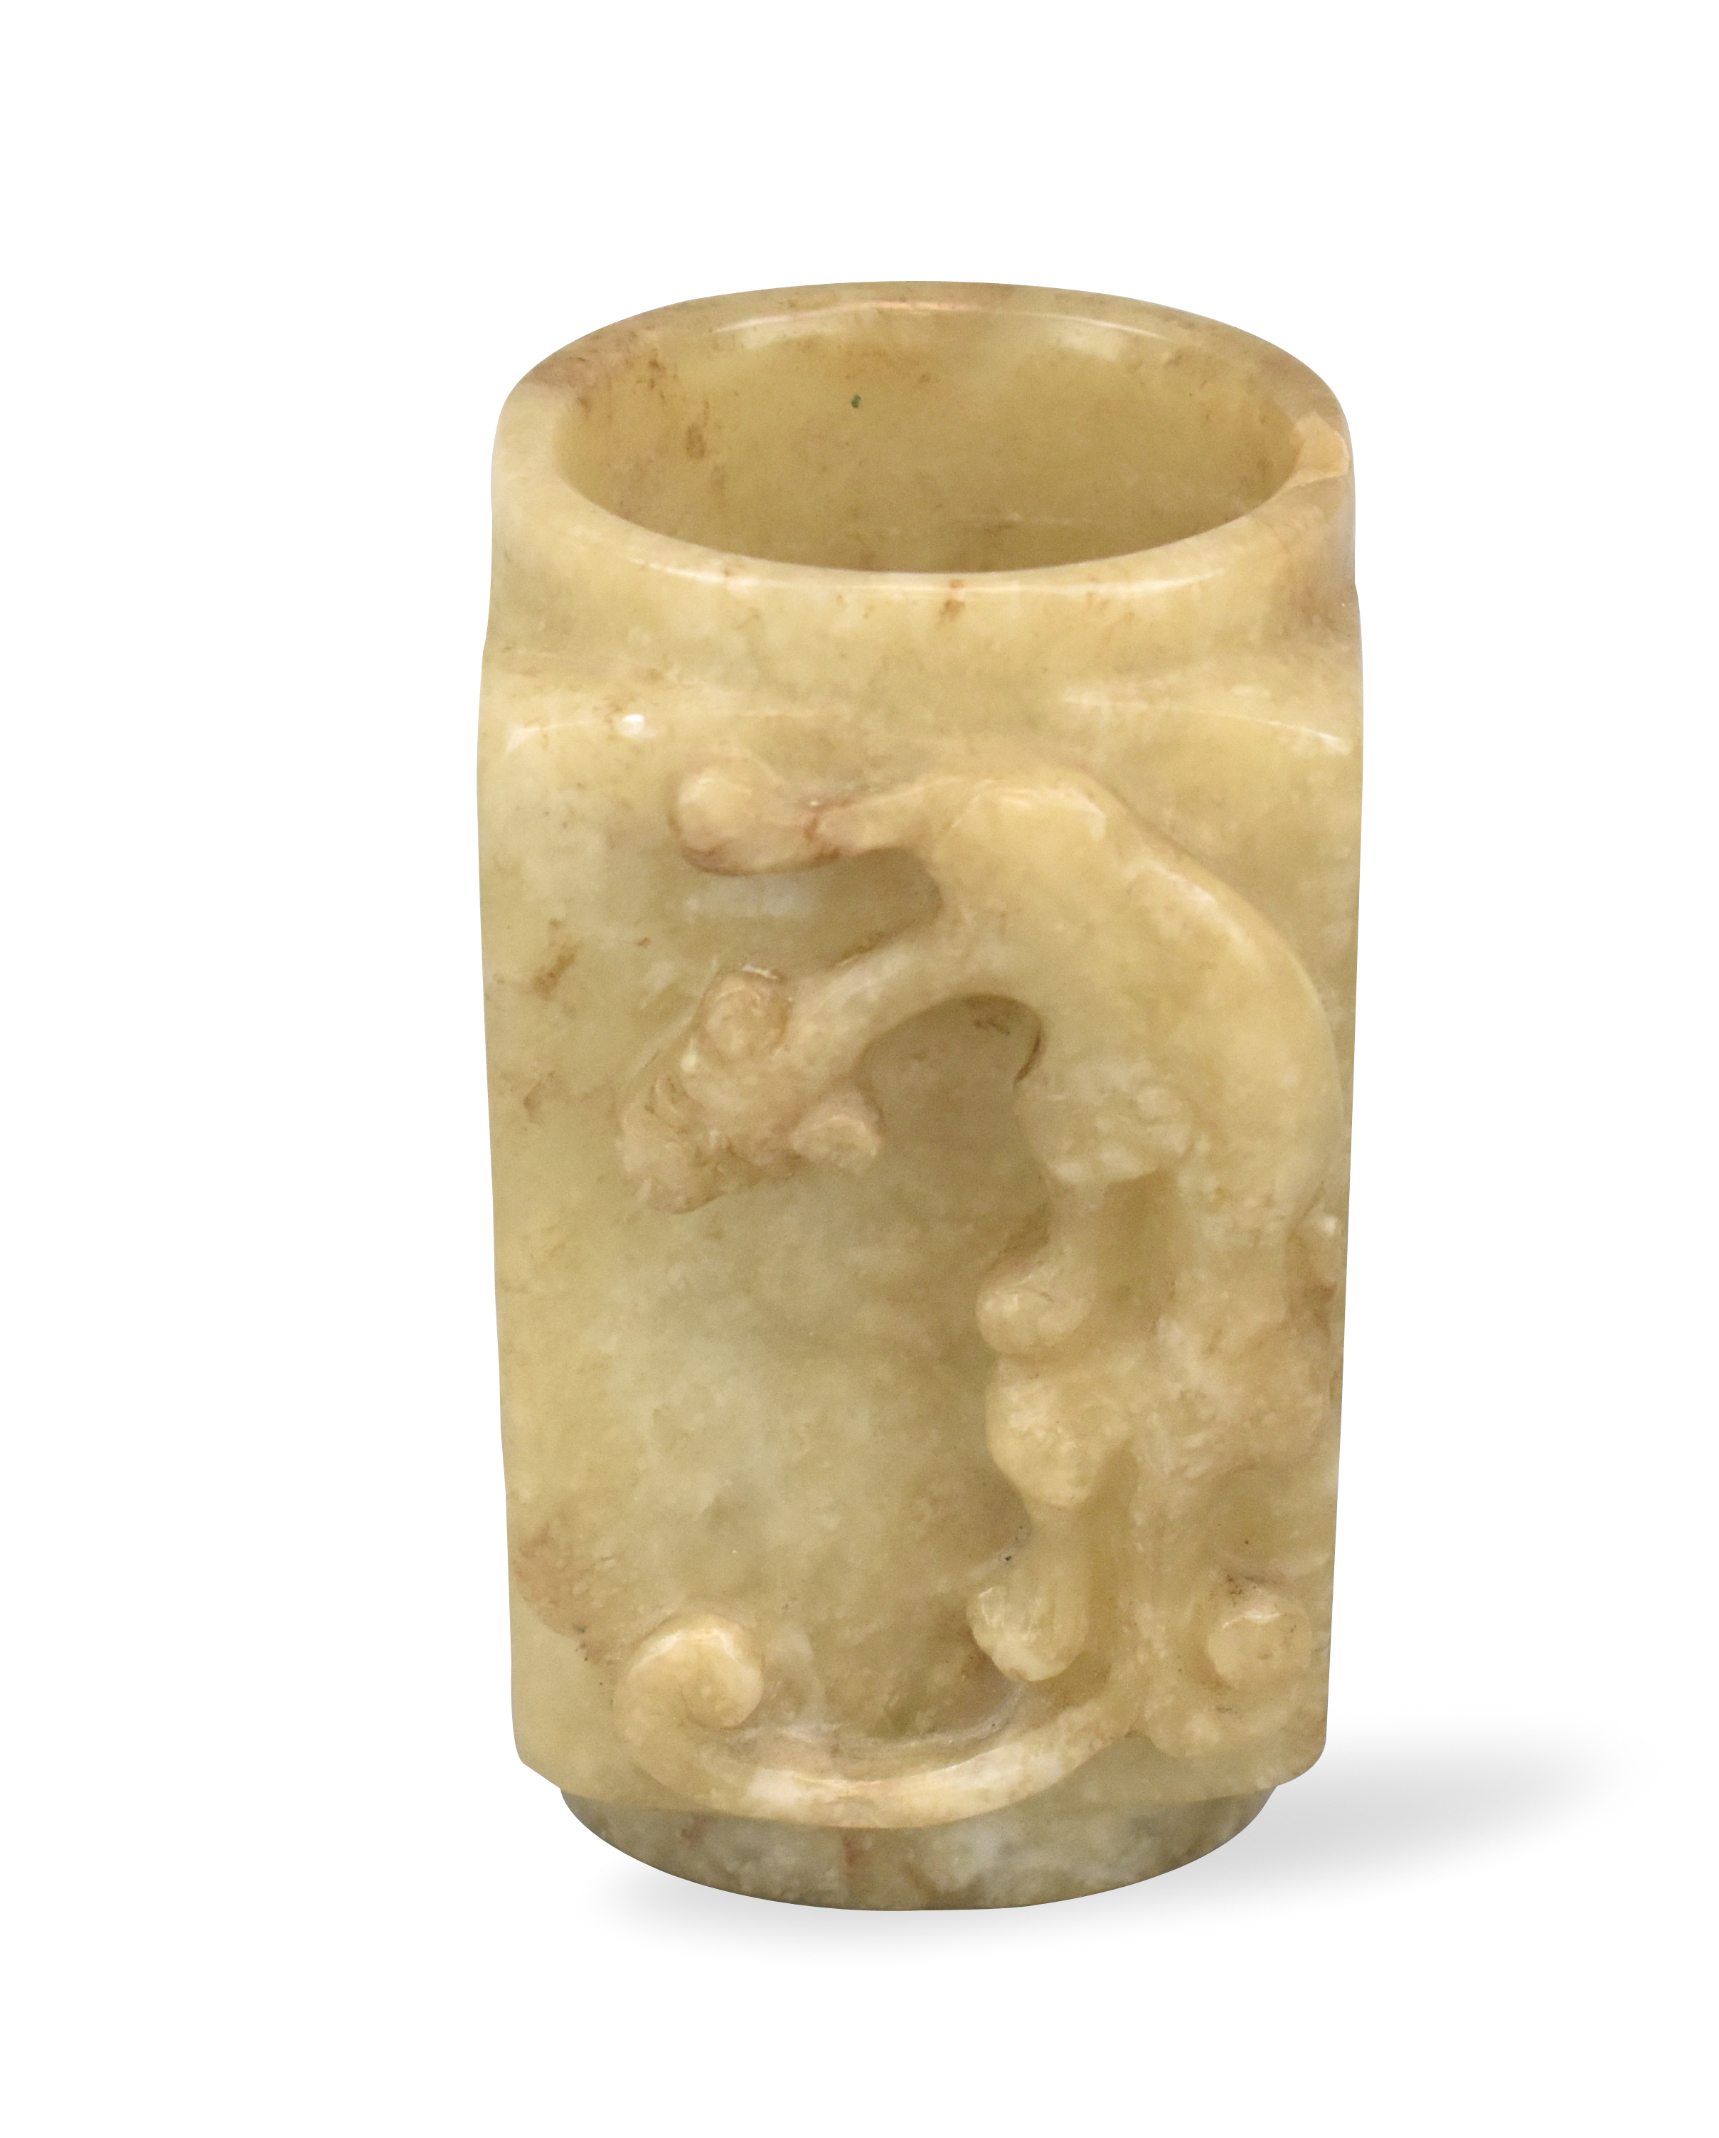 CHINESE ARCHAISTIC JADE CONG VASE